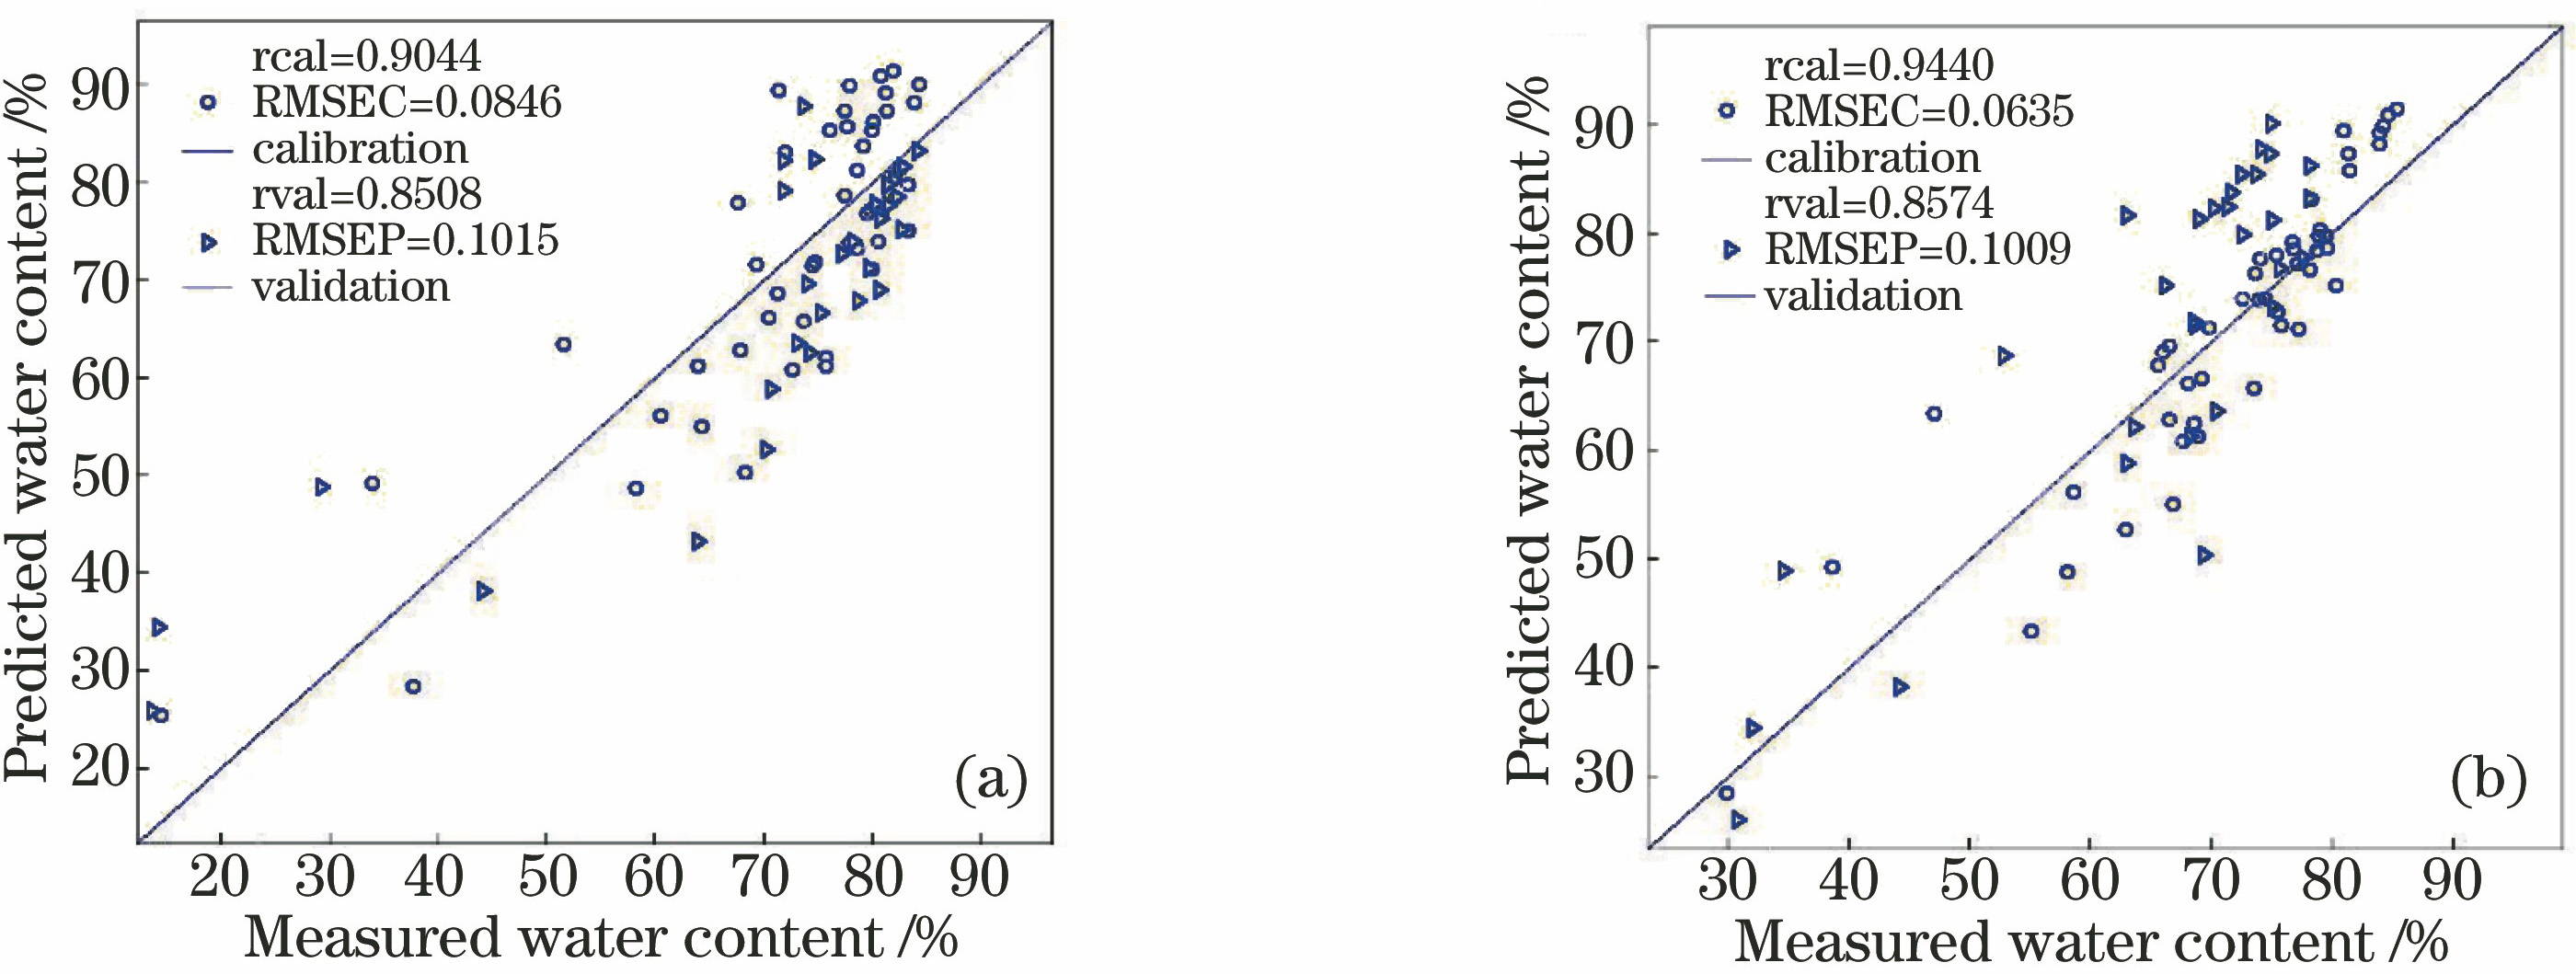 Calibration and validation results for water content prediction using KPLS models[26].(a) Established by the transmission spectra; (b) established by the absorption spectra